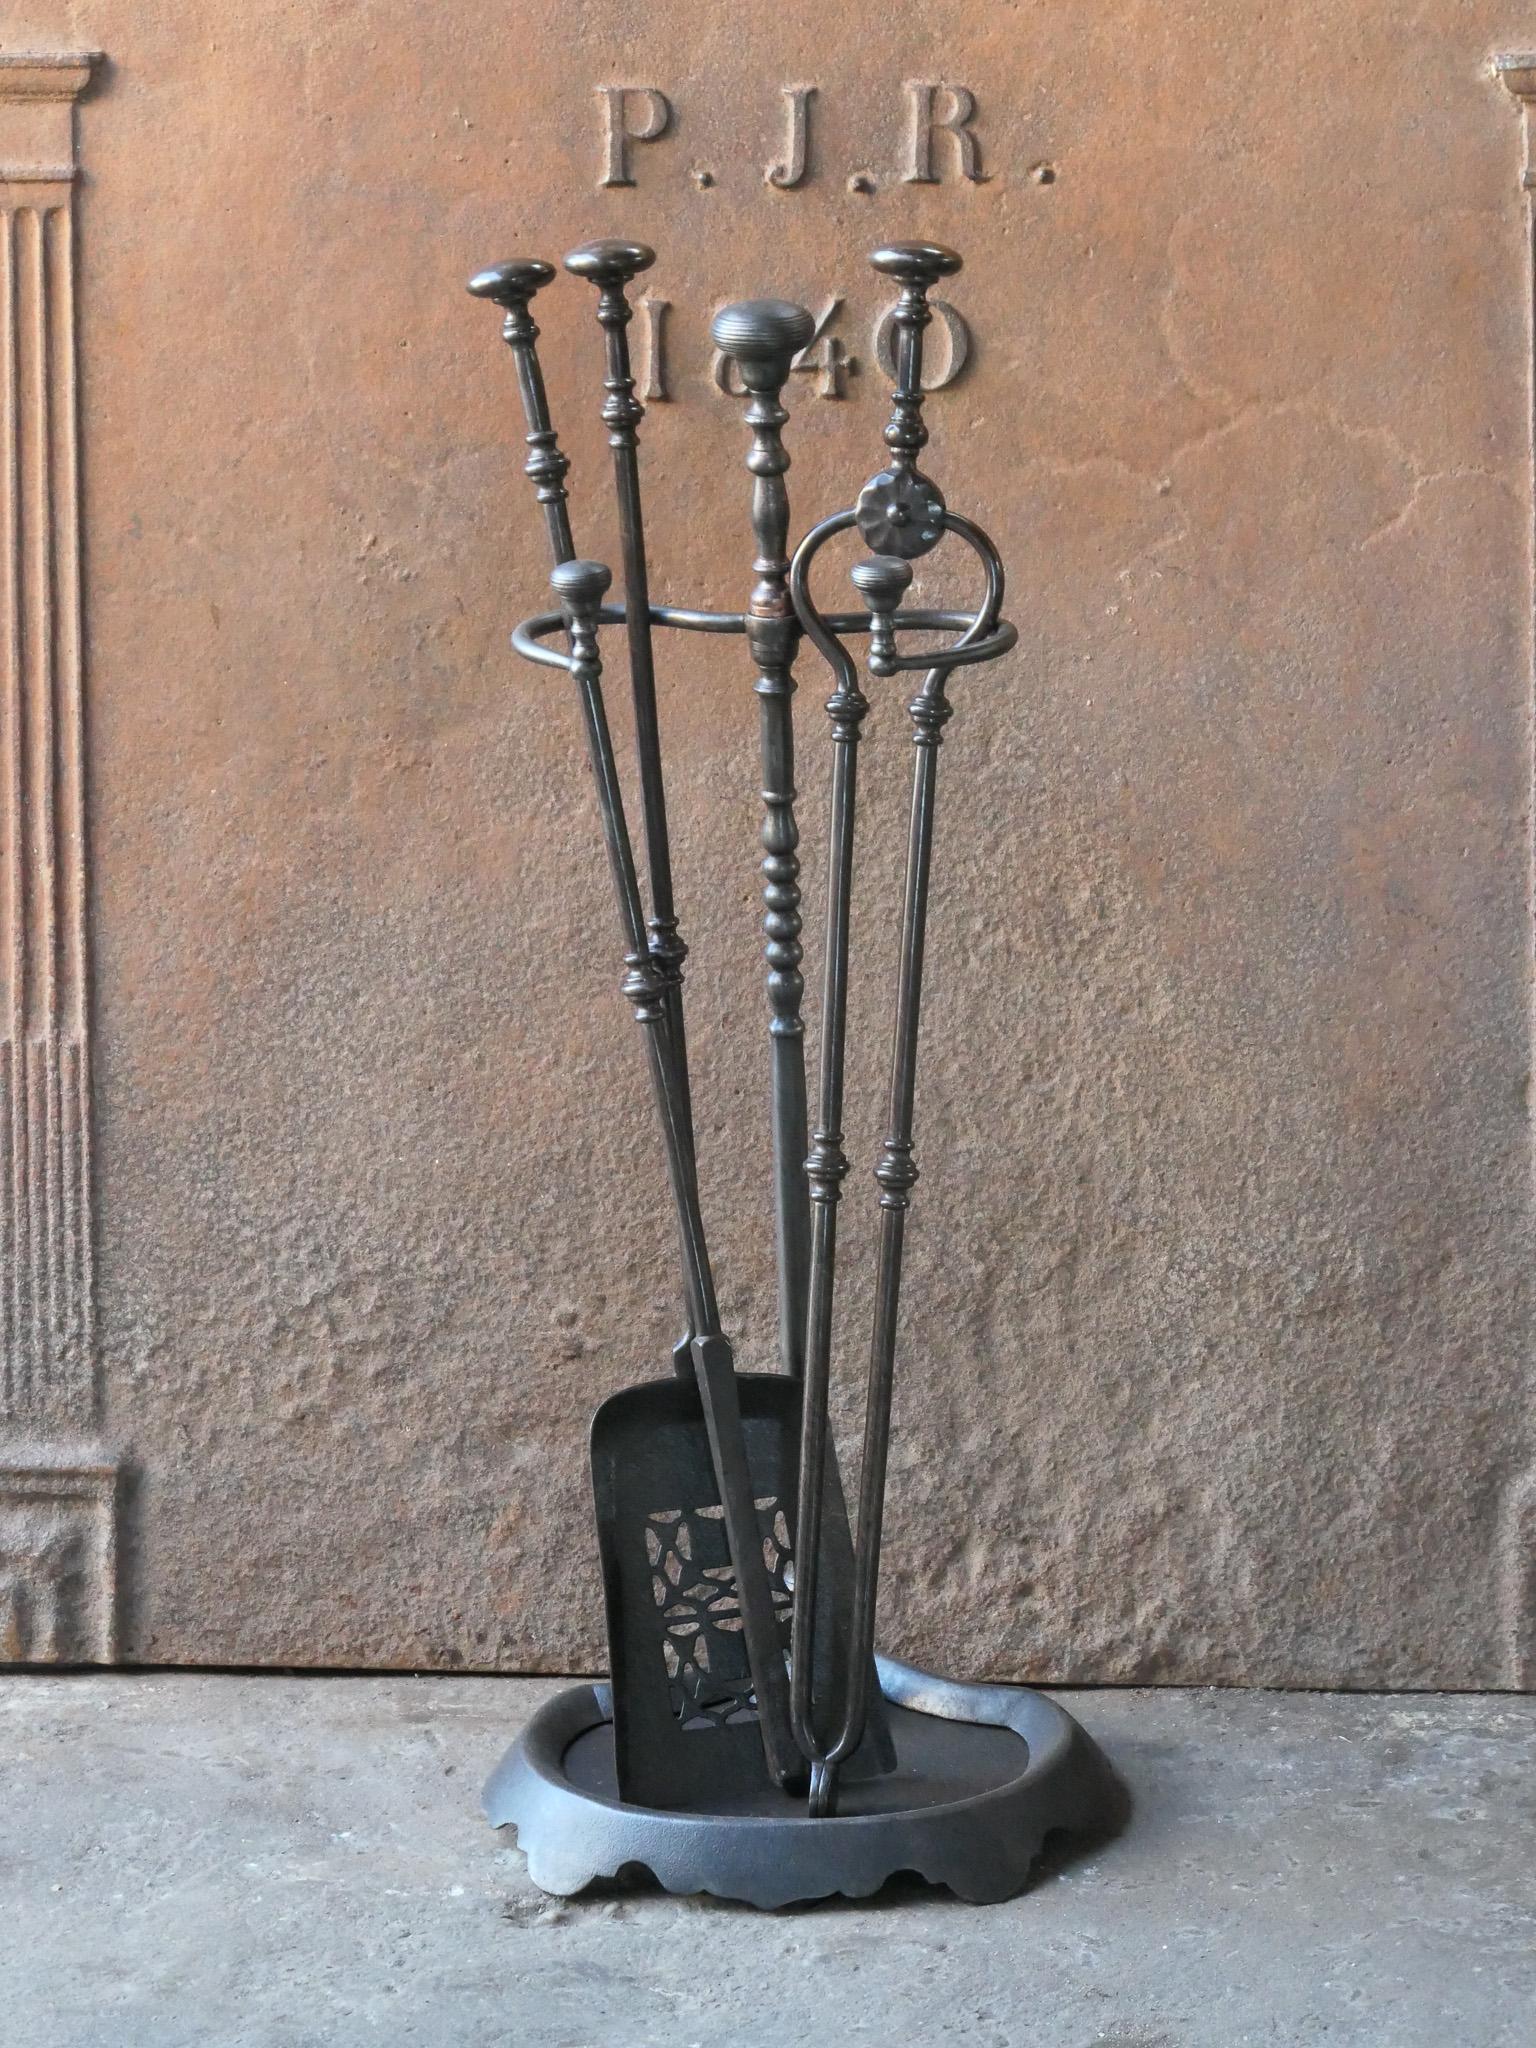 19th century English Victorian period fireplace toolset. The tools and stand are made of wrought iron. The toolset consists of tongs, shovel, poker and stand. The condition is good.








.